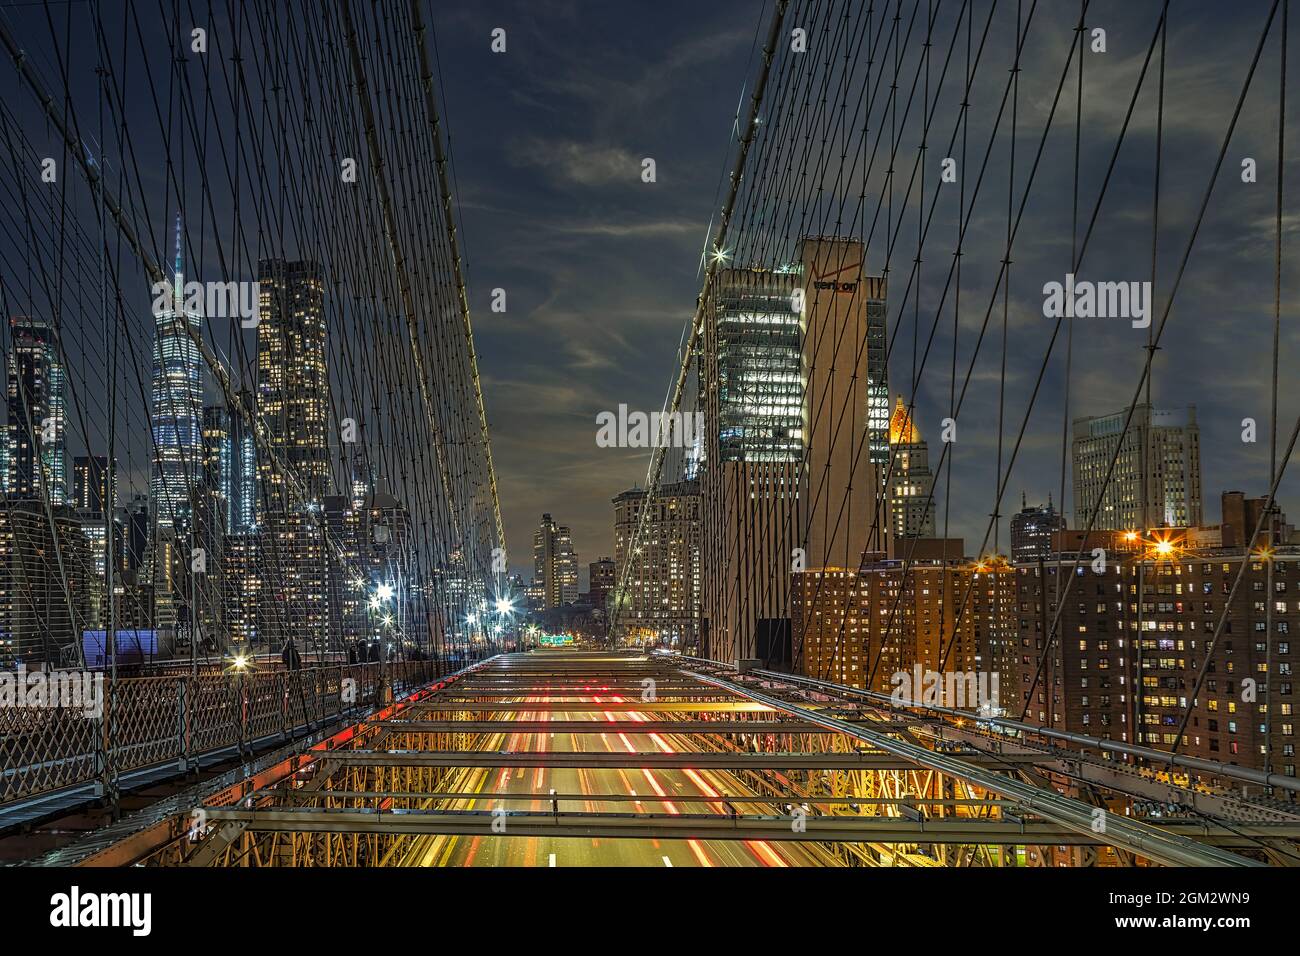 A Path To NYC - View of the vehiular traffic, the Brooklyn Bridge suspension bridge, One World Trade Center and the Lower Manhattan skyline.  This ima Stock Photo